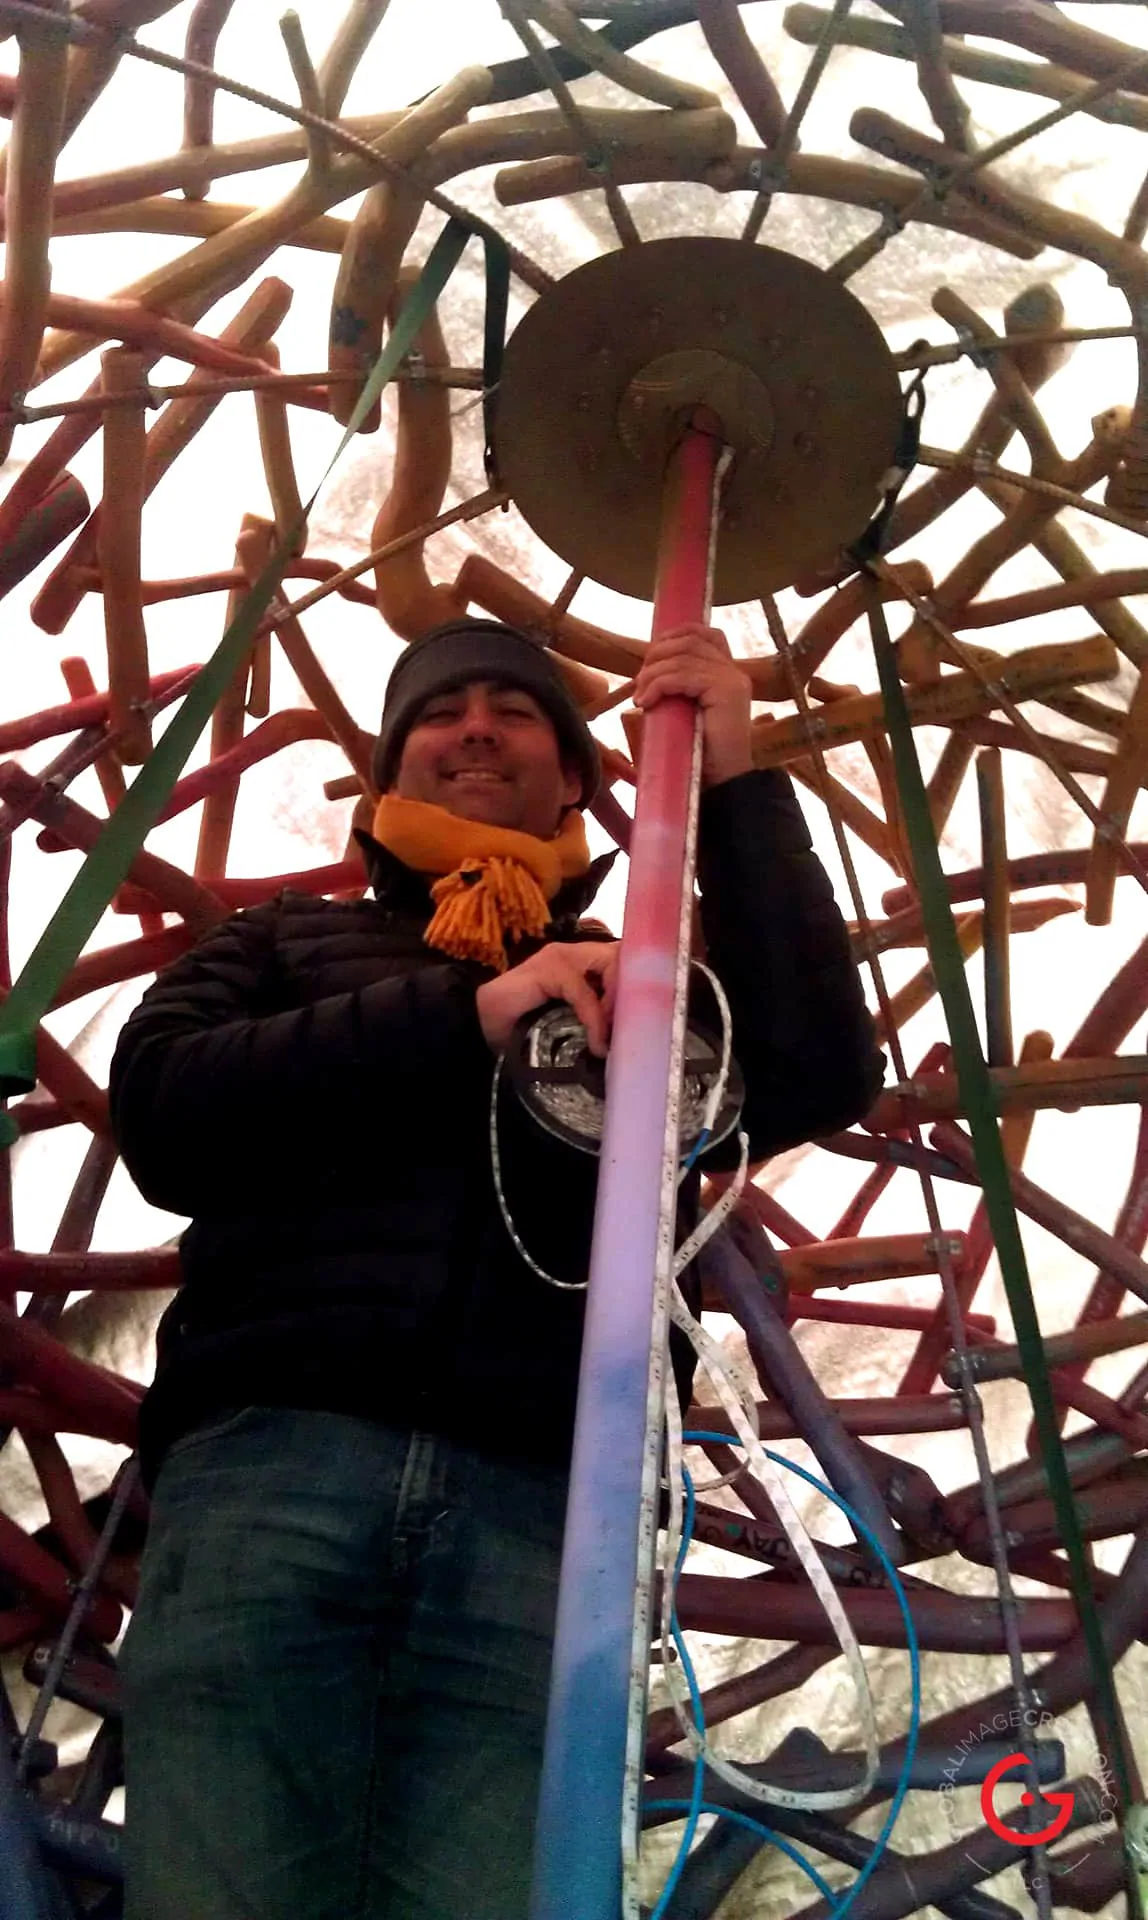 Jeremy Mason McGraw Wiring up The LED Lighting Inside of The Snow Covered Sphere Sculpture